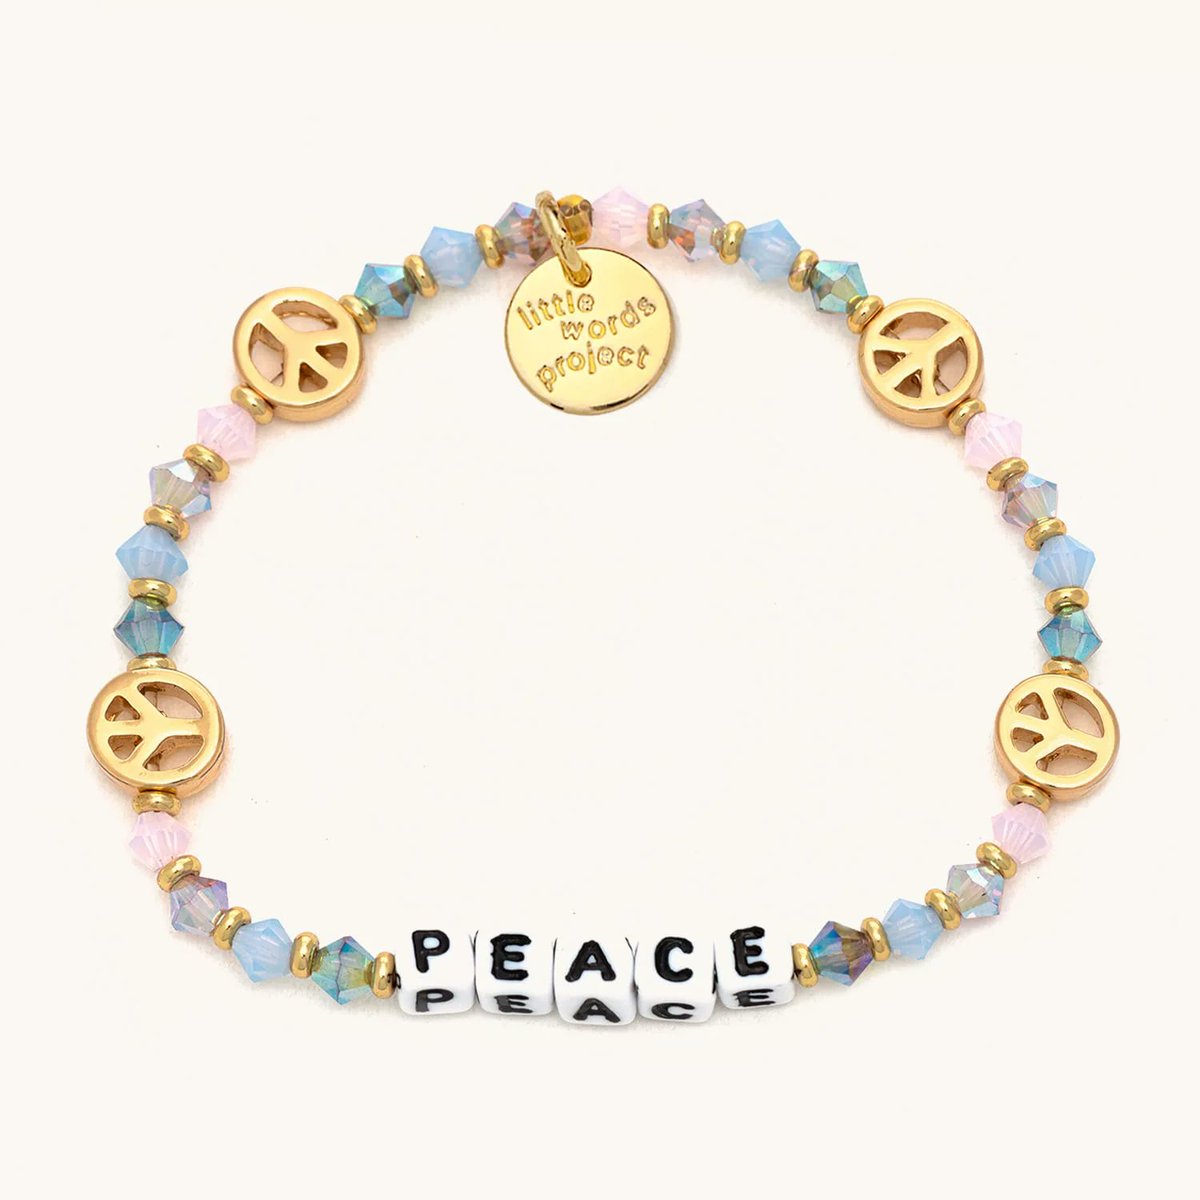 I love my 'Little Words Project' bracelets. They keep me mindful.
sldr.page.link/HBZm
Code: BAVERYMARY to save 15% off
#LittleWordsProject #teens #womensgifts #fashionjewelry #giftsforher #pretty #cute #kawaii #birthdaygifts #style2024 #everydaygifts #inspirational #wholesale